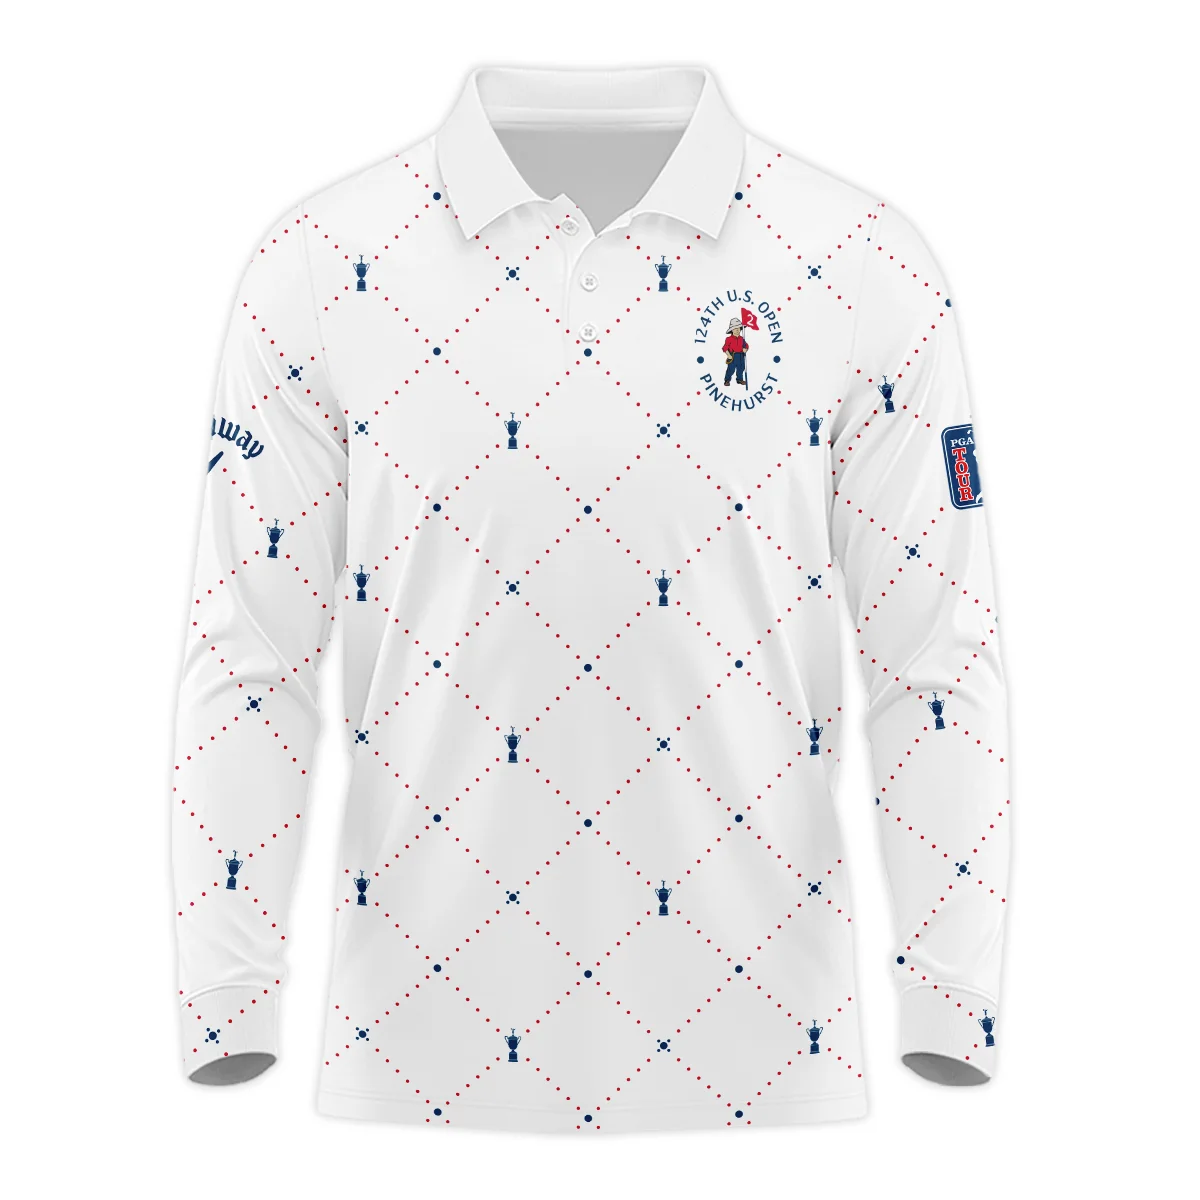 Argyle Pattern With Cup 124th U.S. Open Pinehurst Callaway Polo Shirt Style Classic Polo Shirt For Men